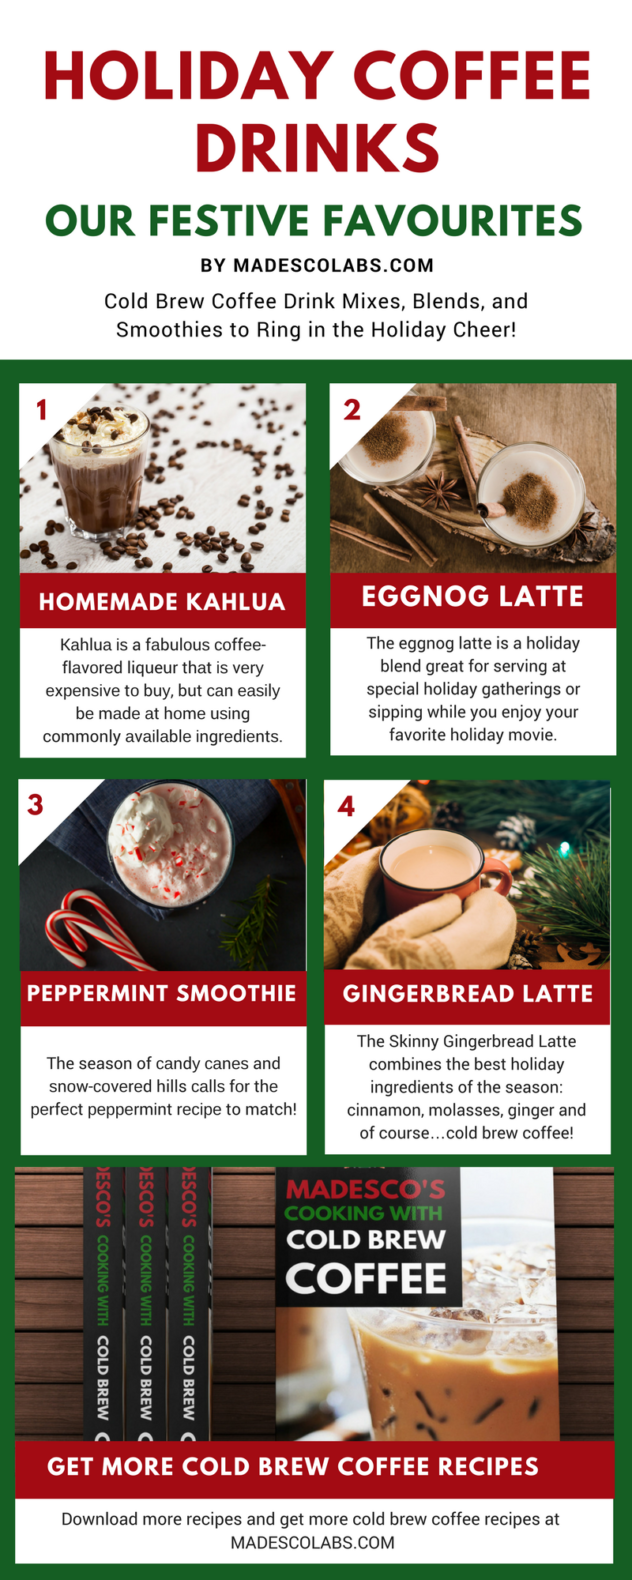 Holiday Coffee Drinks with Cold Brew Coffee